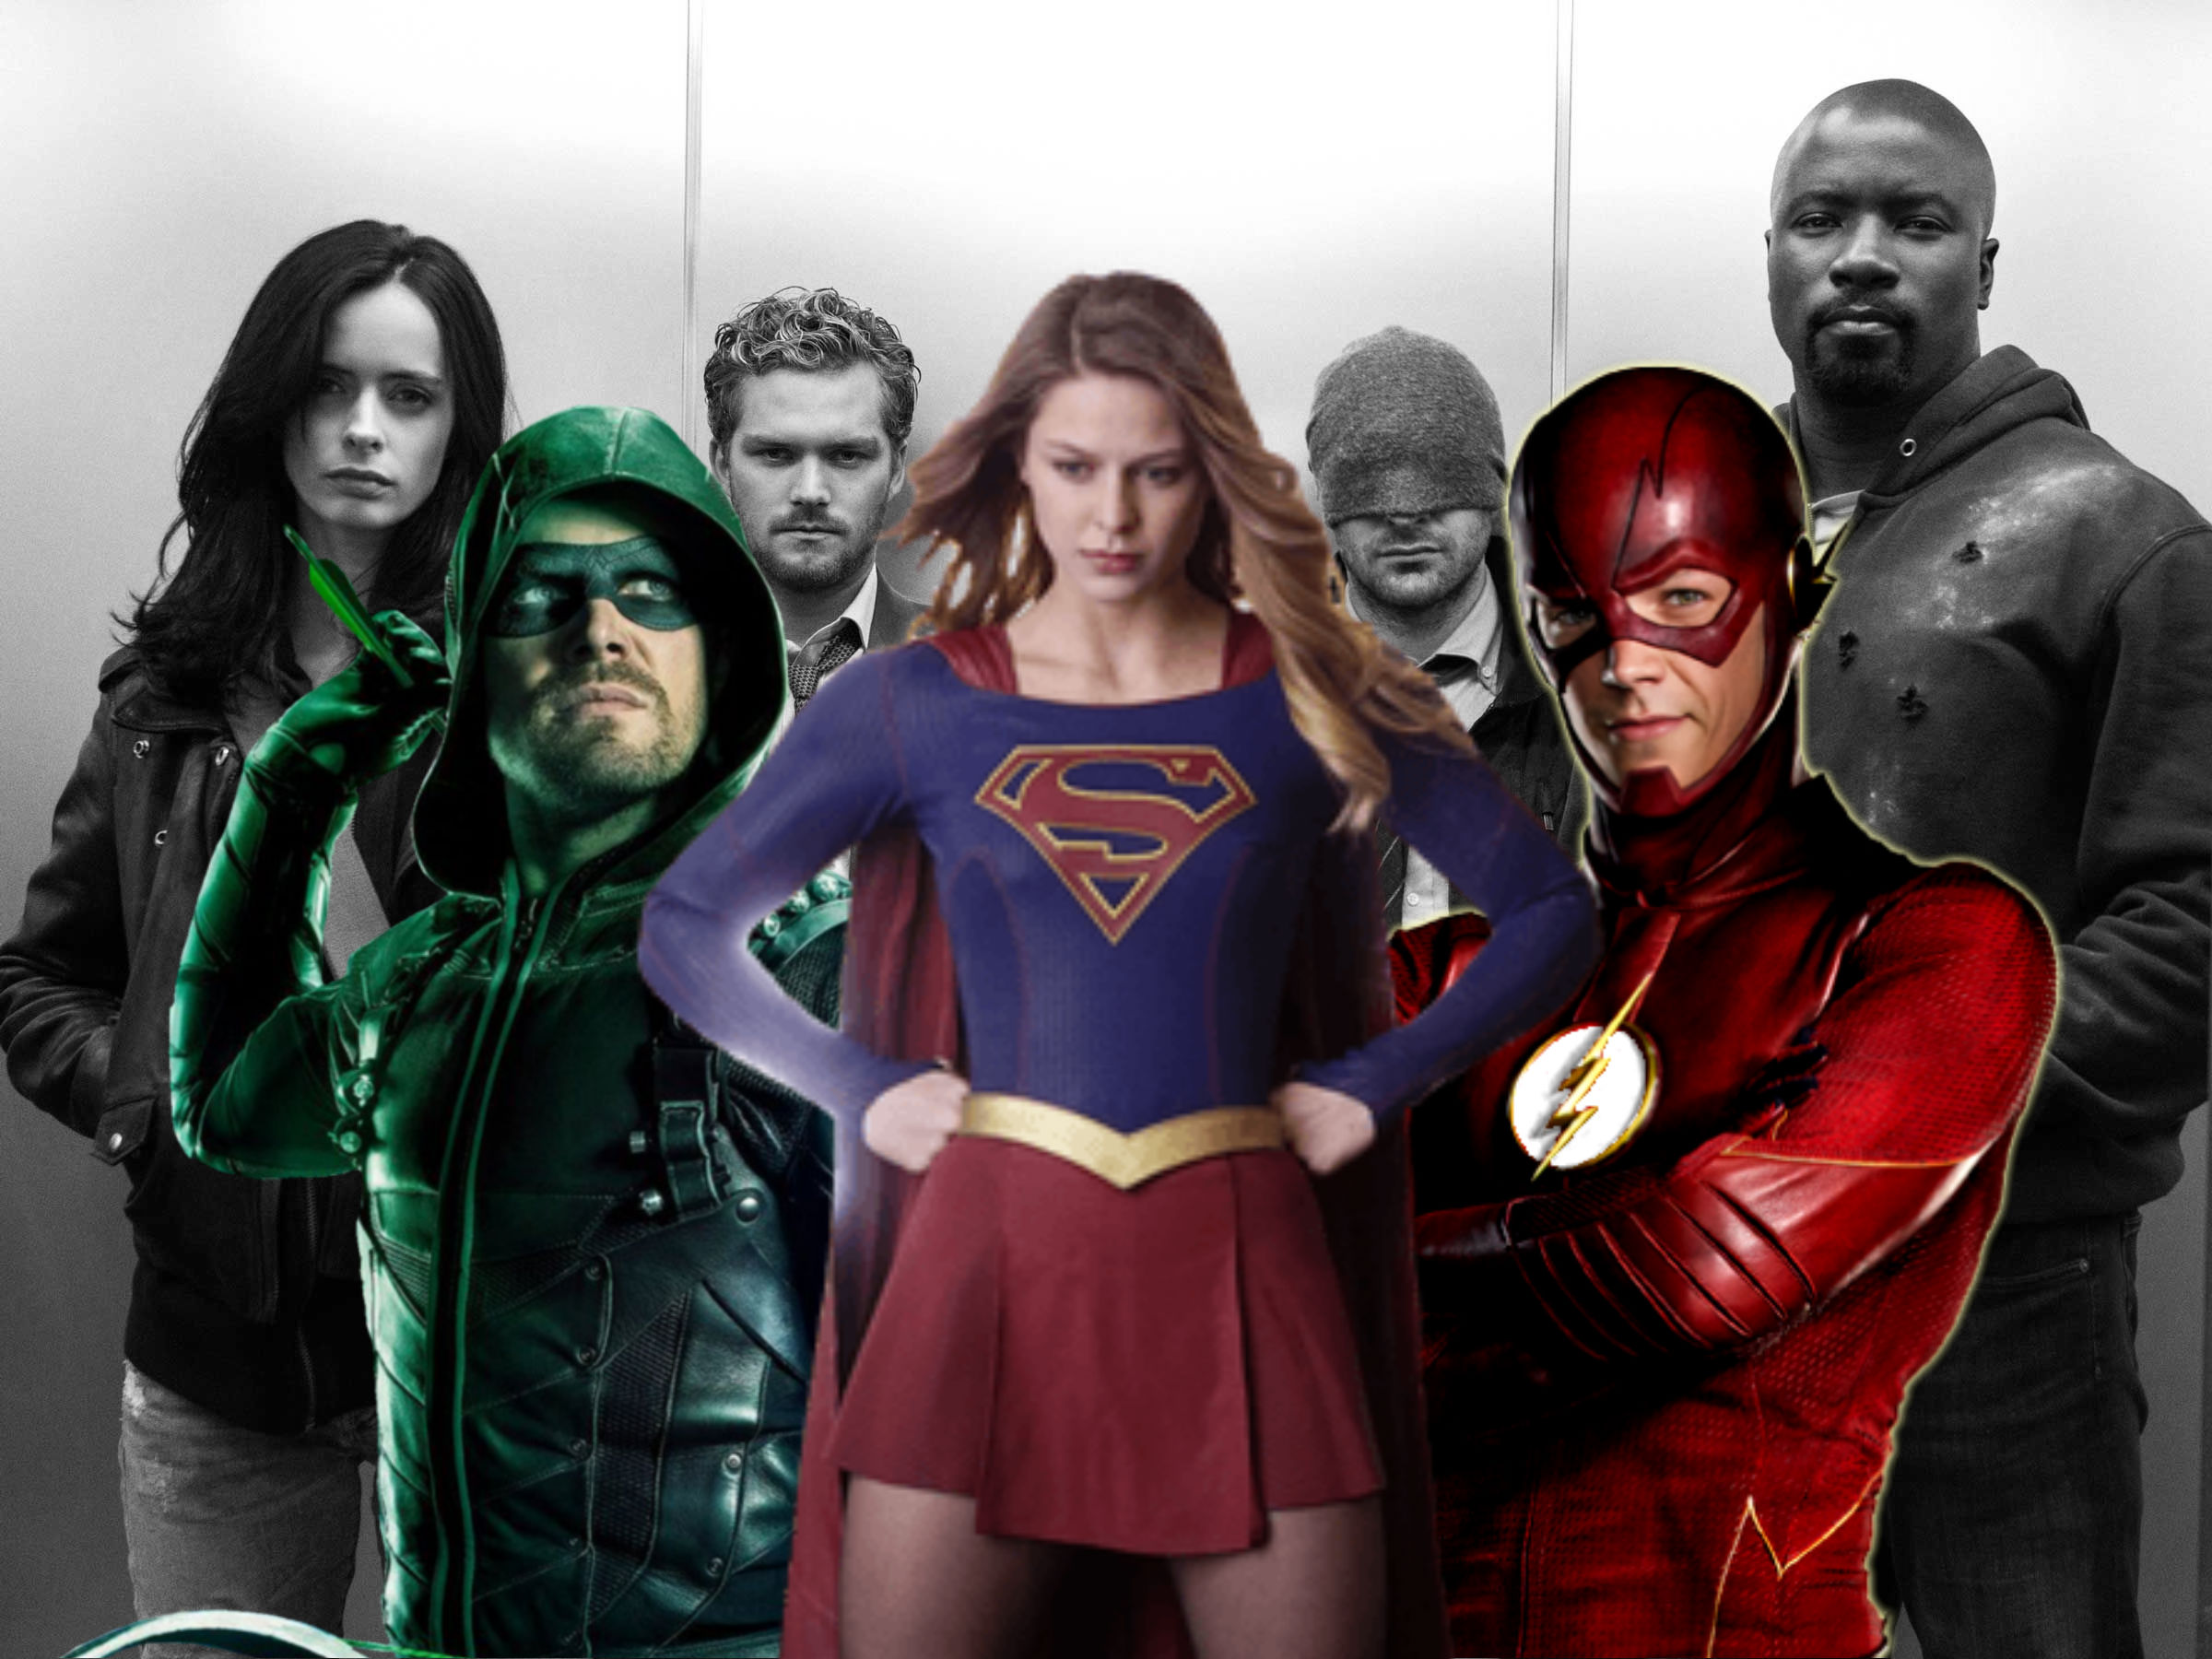 Why DC’s Arrowverse Is Still Strong While The Marvel Netflix Shows Are Floundering